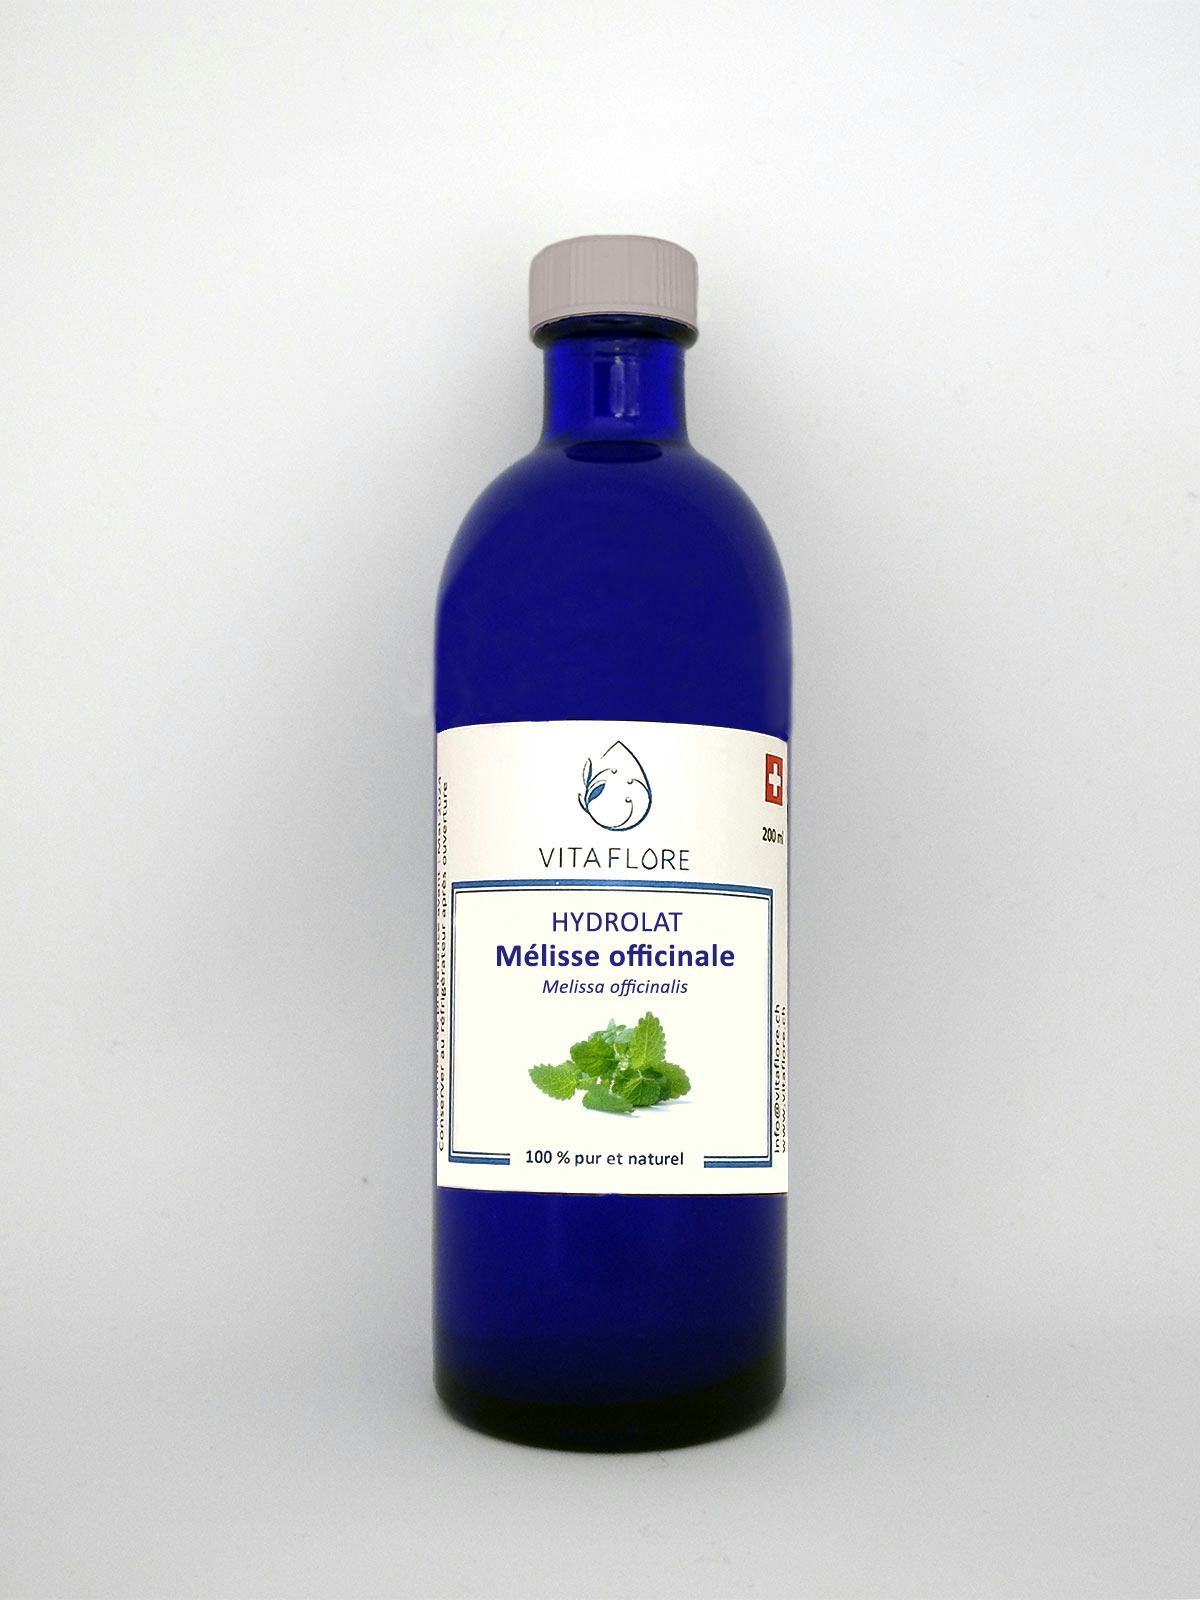 Hydrolat Mélisse officinale, artisanal product for direct sale in Switzerland